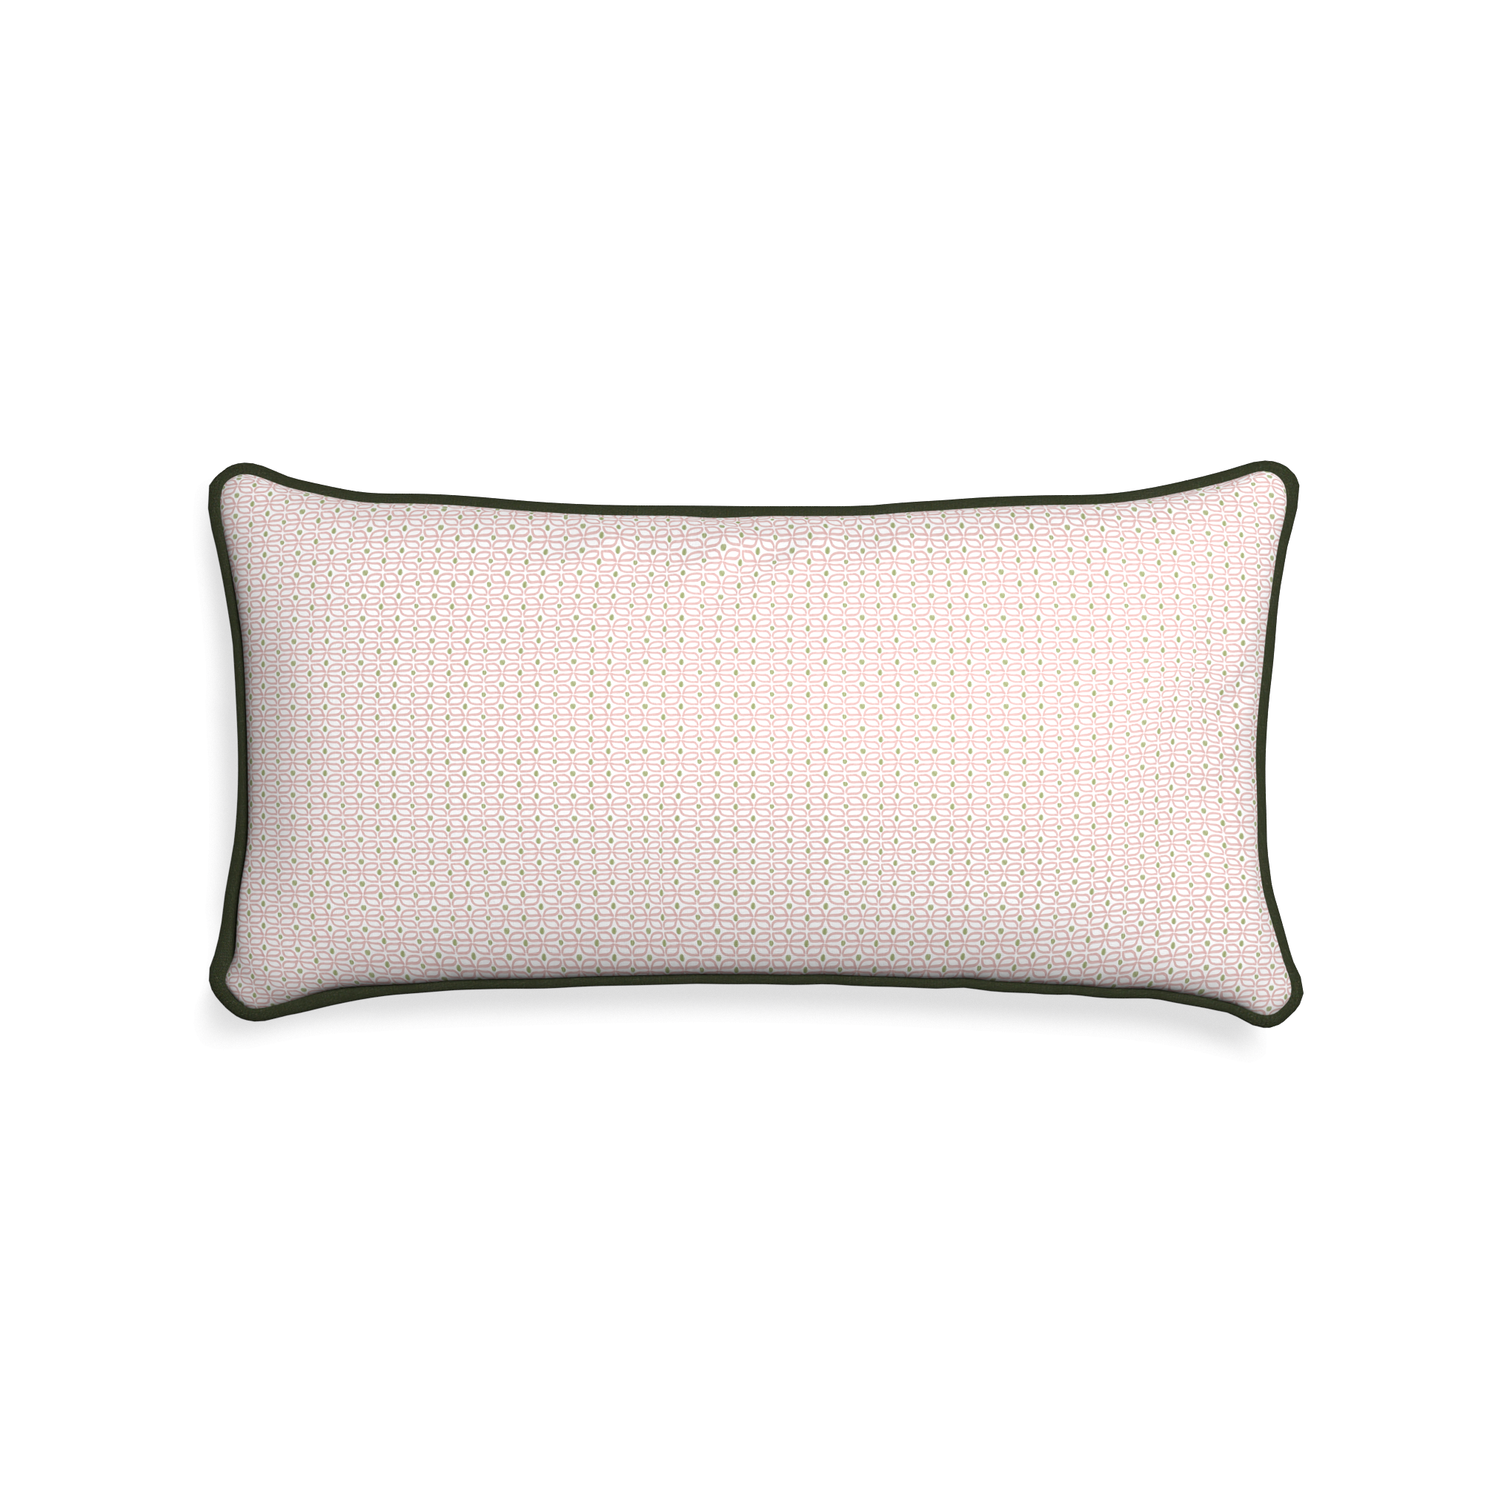 Midi-lumbar loomi pink custom pink geometricpillow with f piping on white background